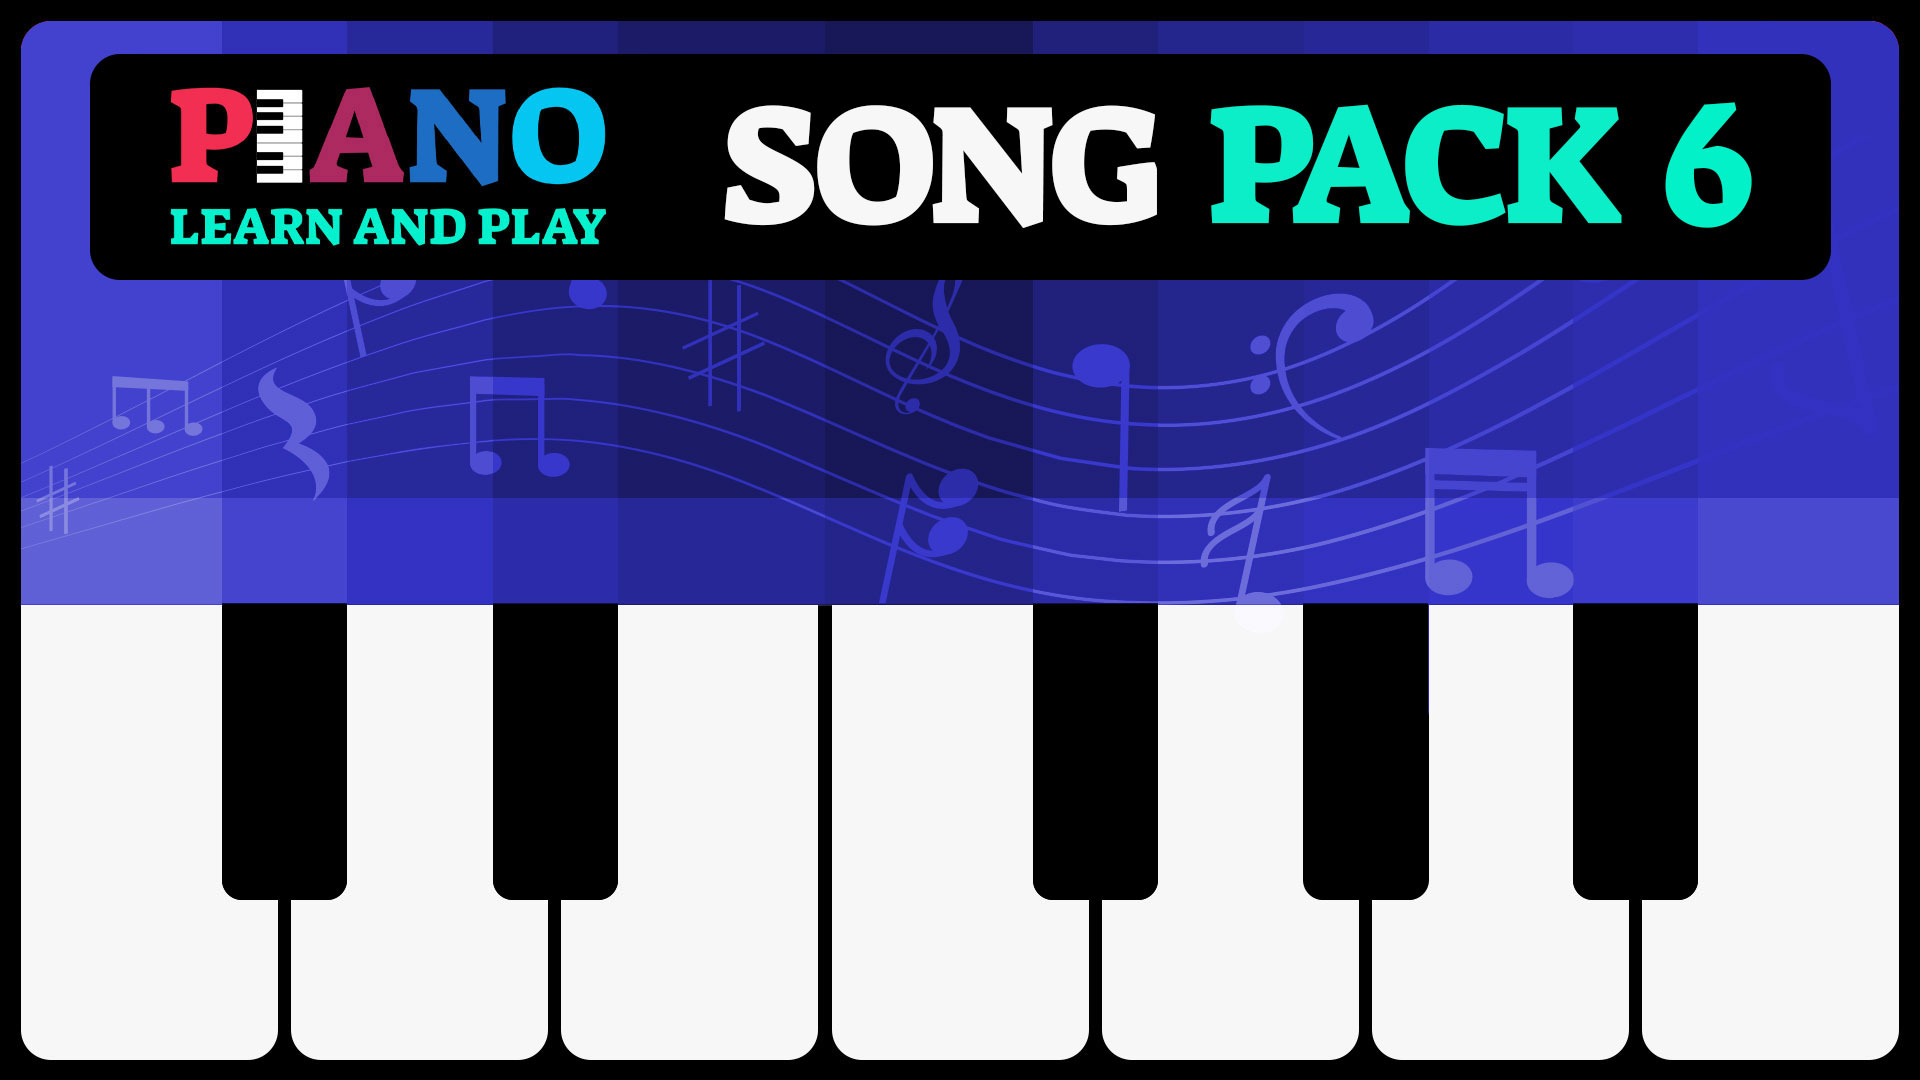 Song Pack 6